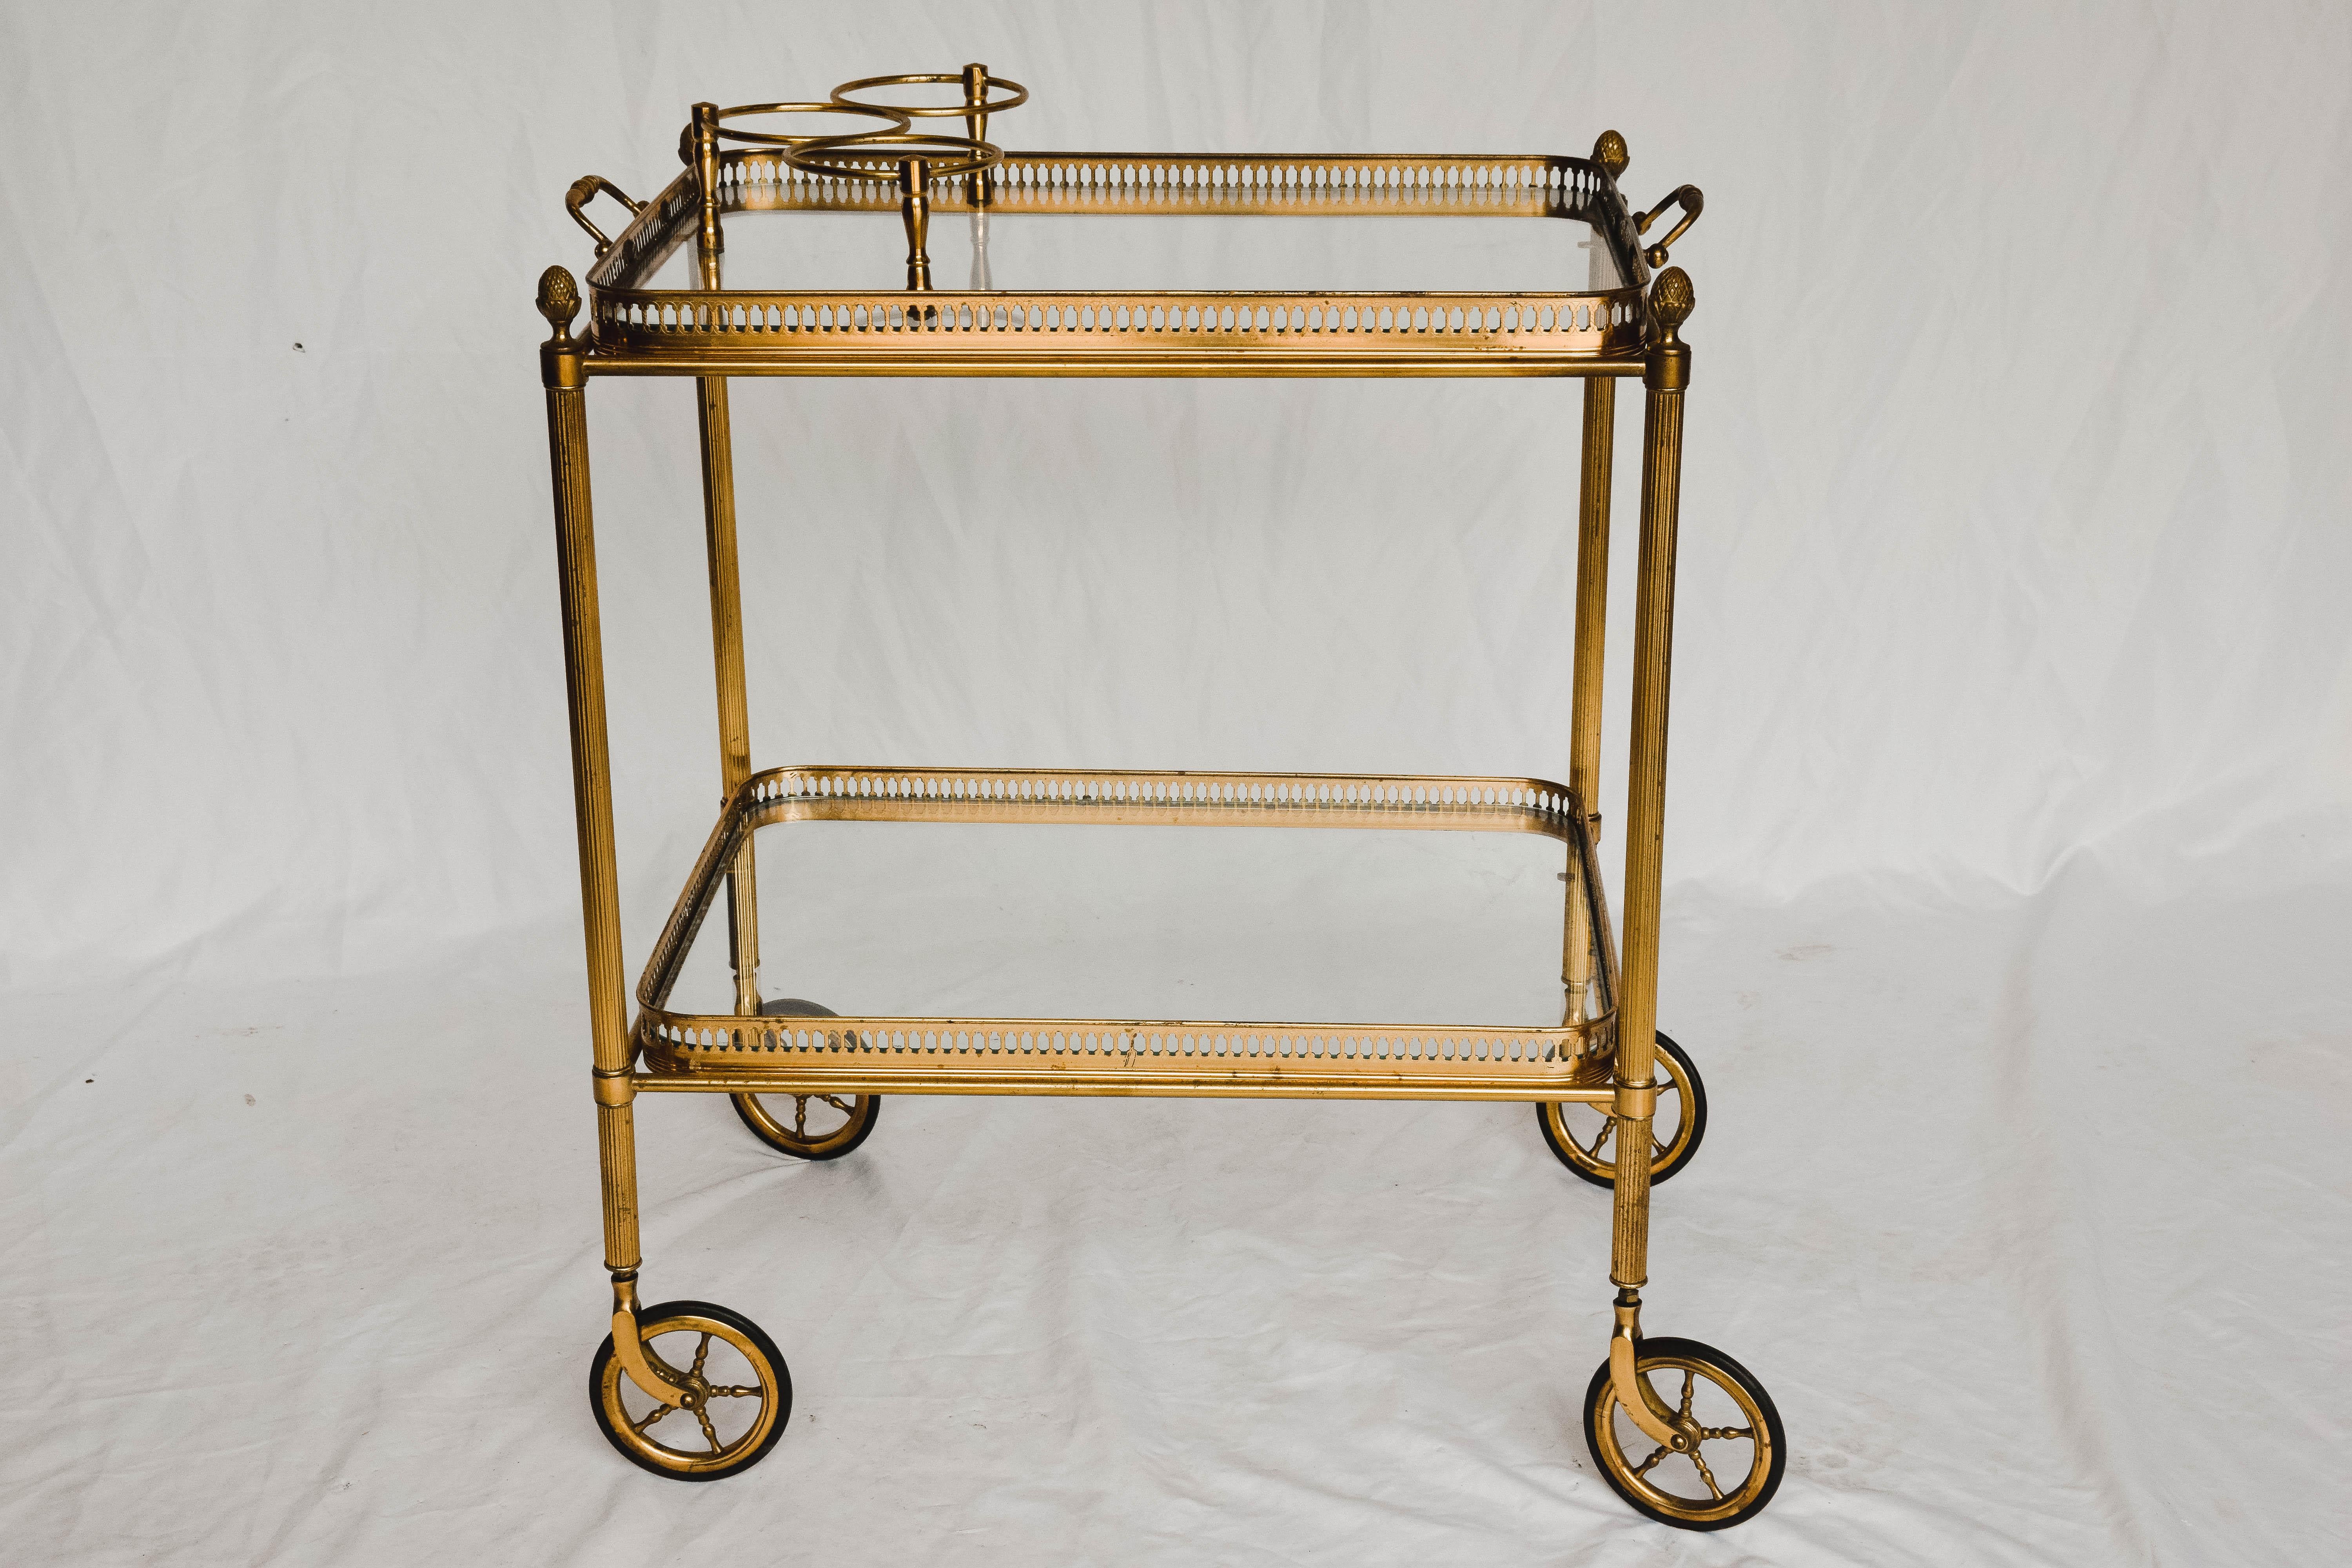 This Mid-Century Modern bar cart is sure to delight. Constructed of brass and glass bringing beauty to the midcentury design. The two glass tiers provide ample space for all your bar needs. It also provides a rack to hold three bottles.